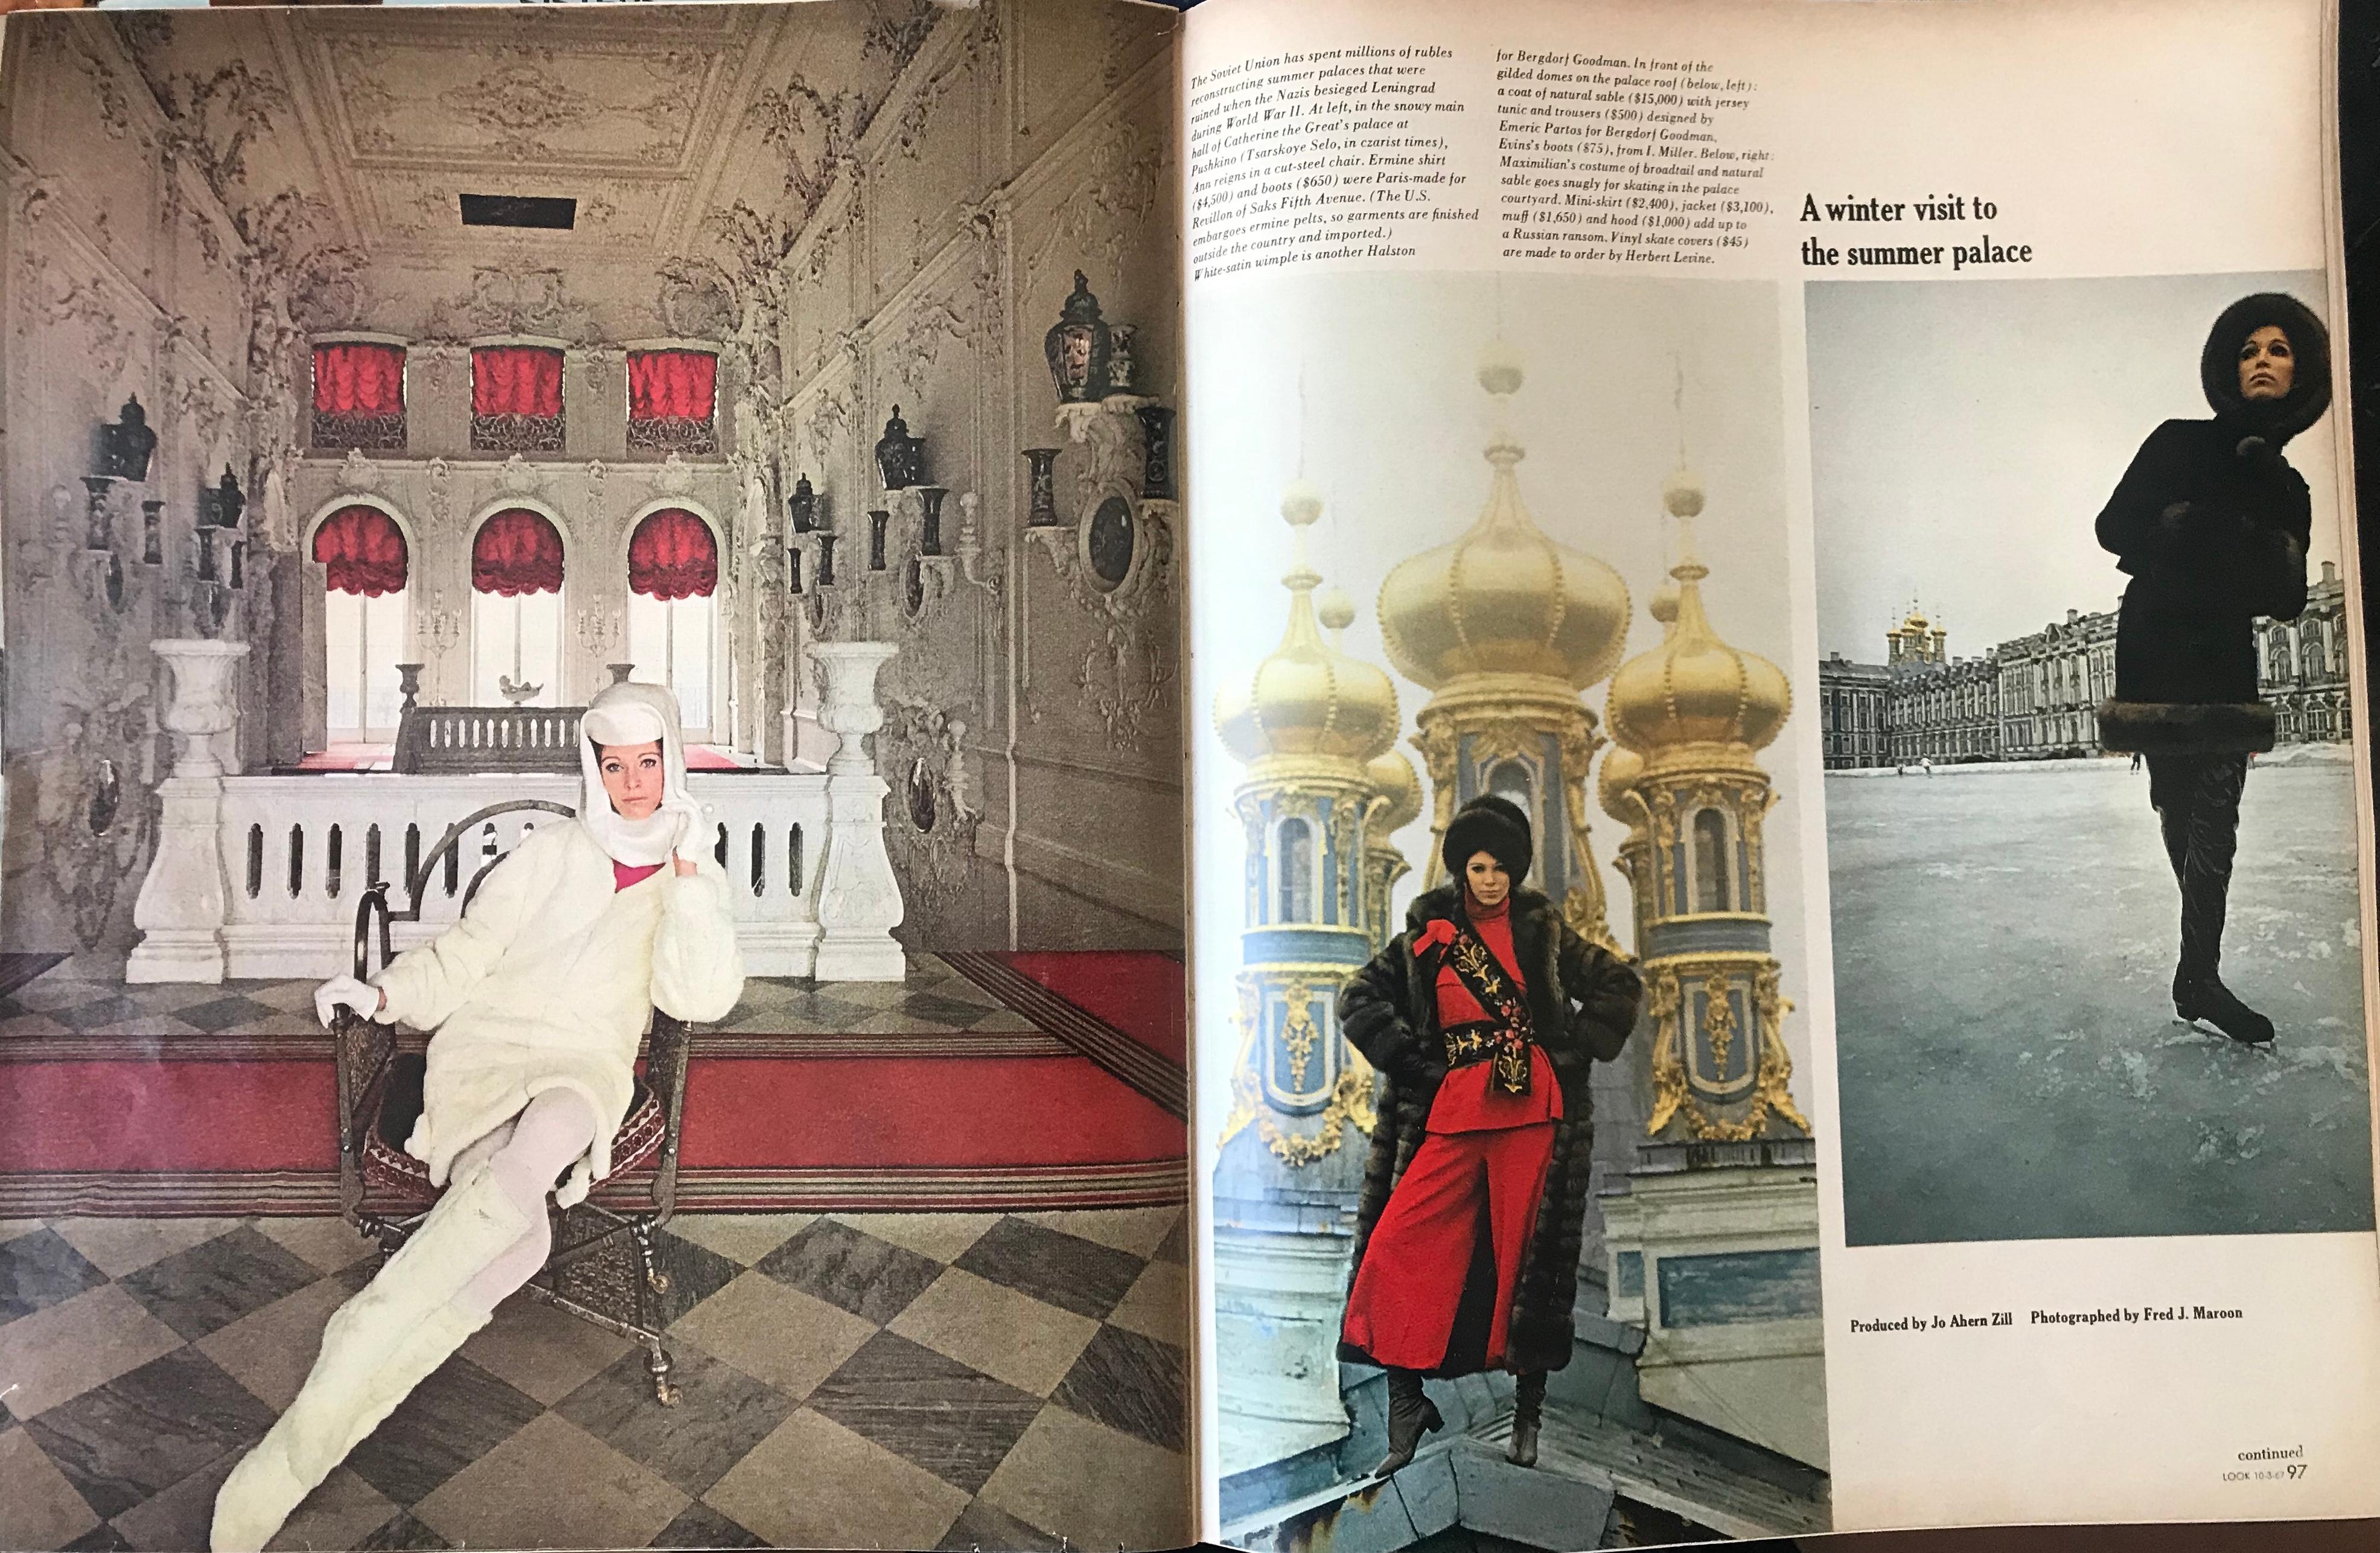 Leningrad: Gilded Domes of the Catherine Palace in nearby Pushkin  - Contemporary Print by Fred J. Maroon